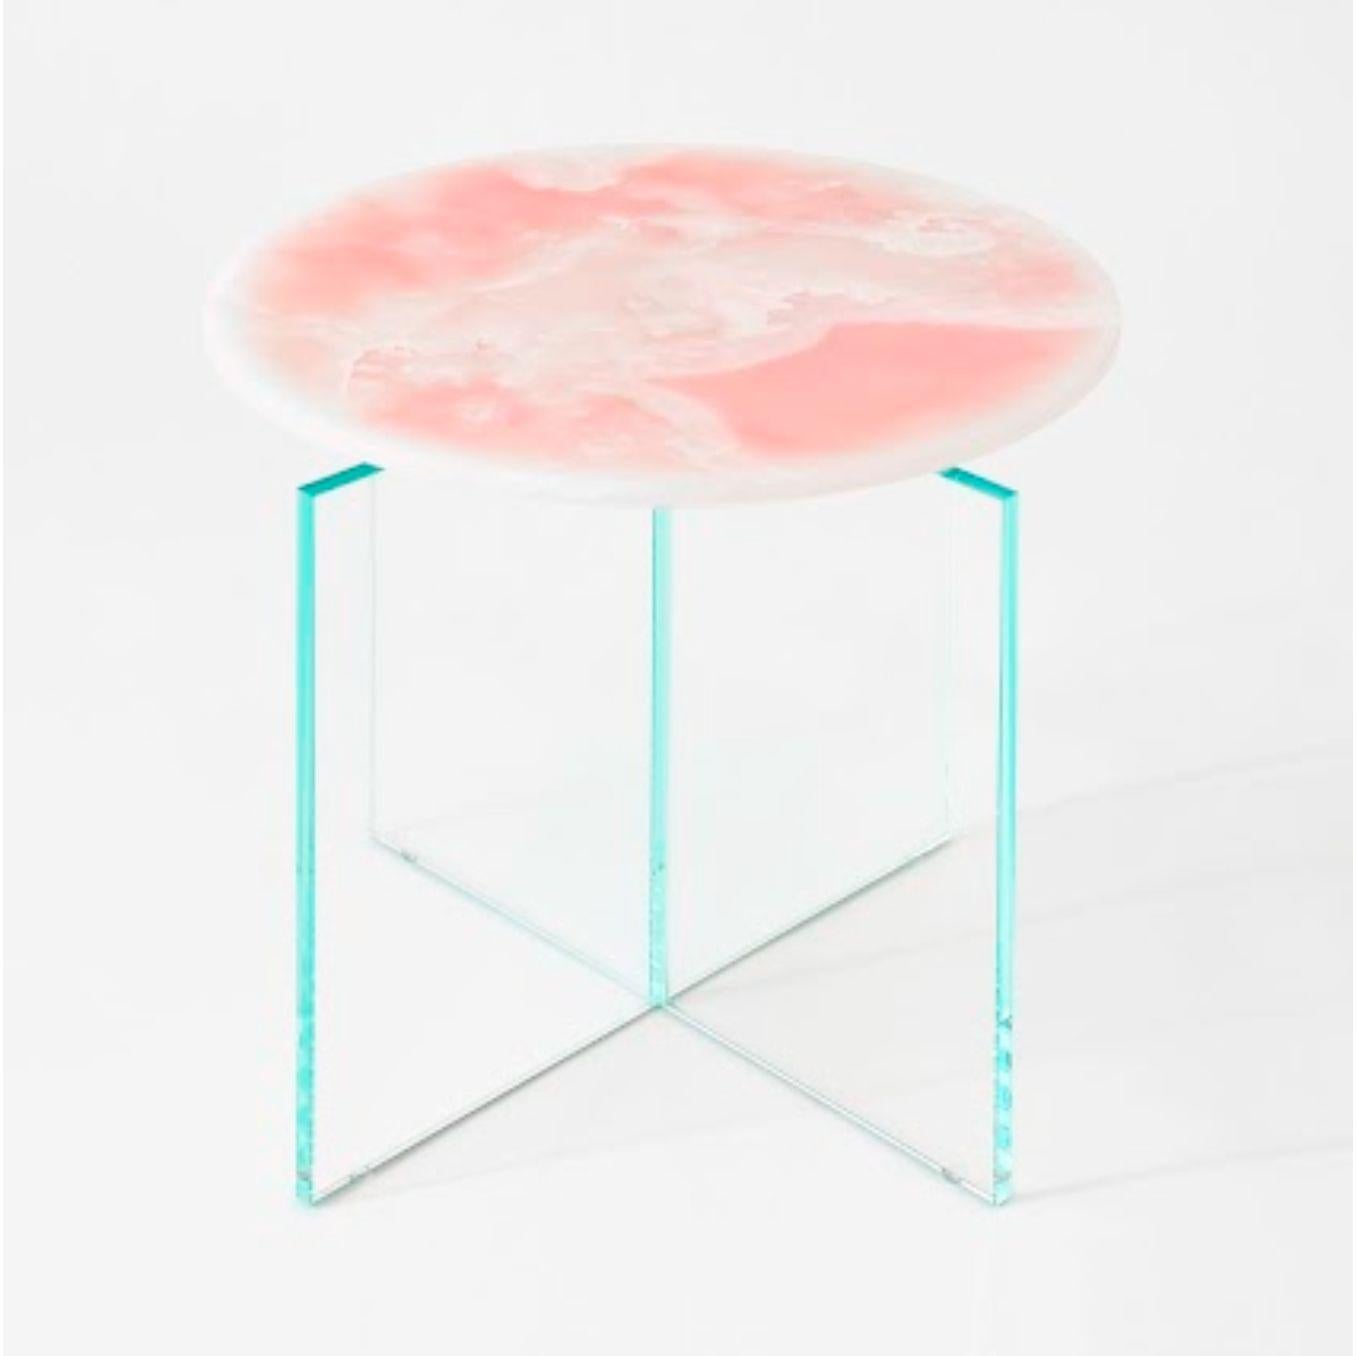 Beside Myself end small table by Claste
Dimensions: D 45.7 x W 45.7 x H 55.9 cm
Material: Marble, Glass
Weight: 41 kg
Also available in different sizes.  


Since 2017 Quinlan Osborne has cultivated an aesthetic in his work that is rooted in